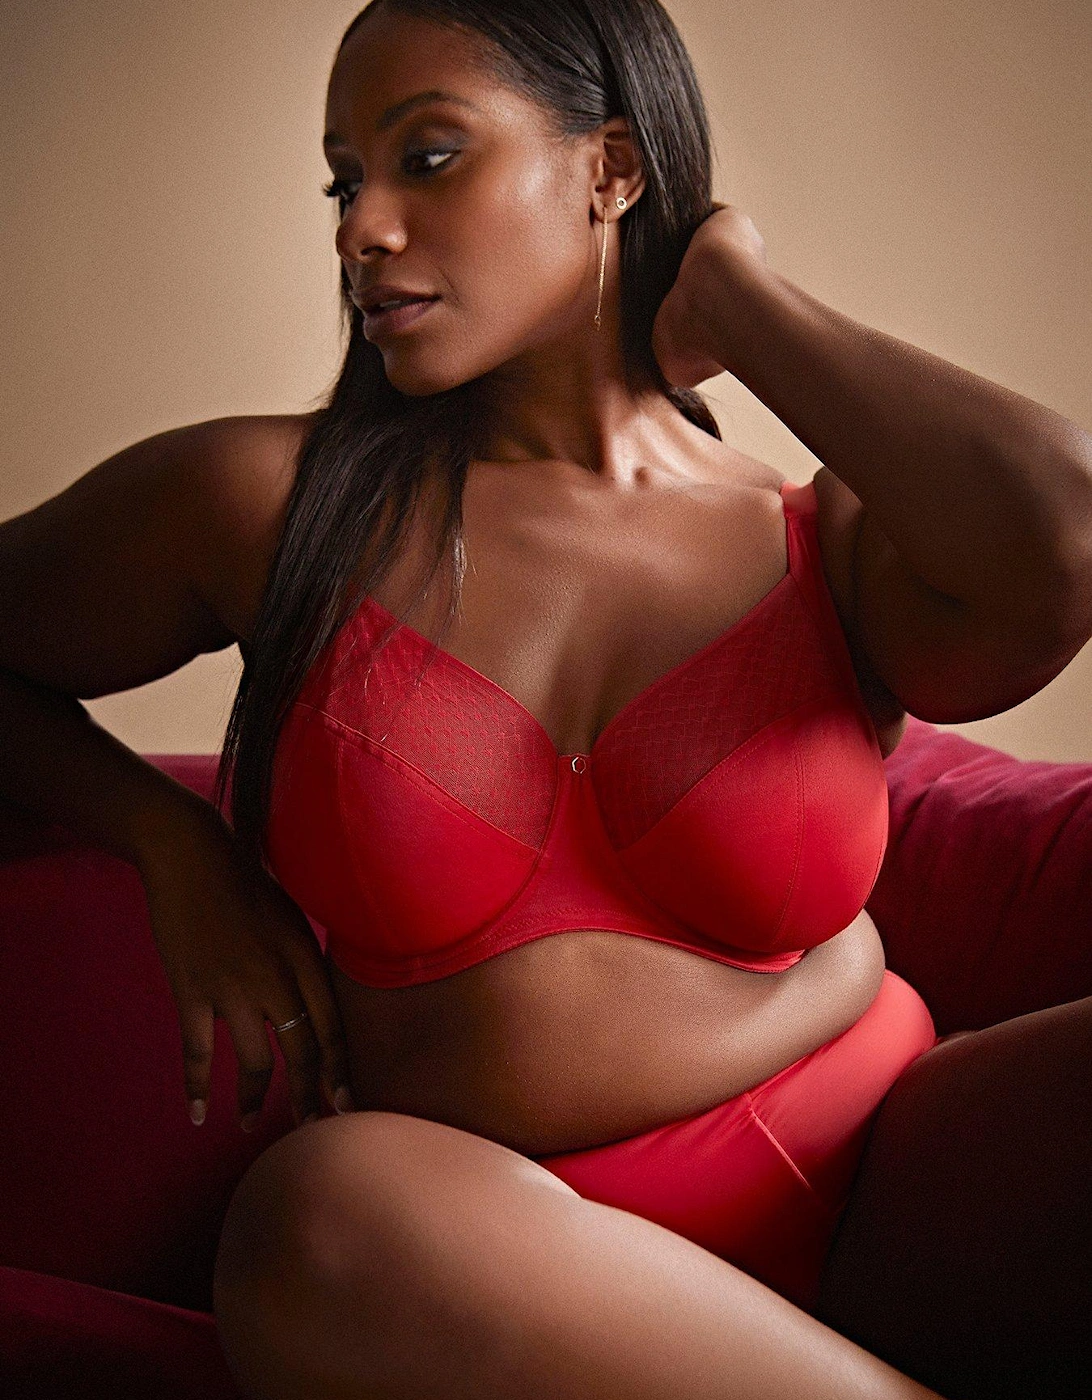 Bliss Full Cup Bra - Red